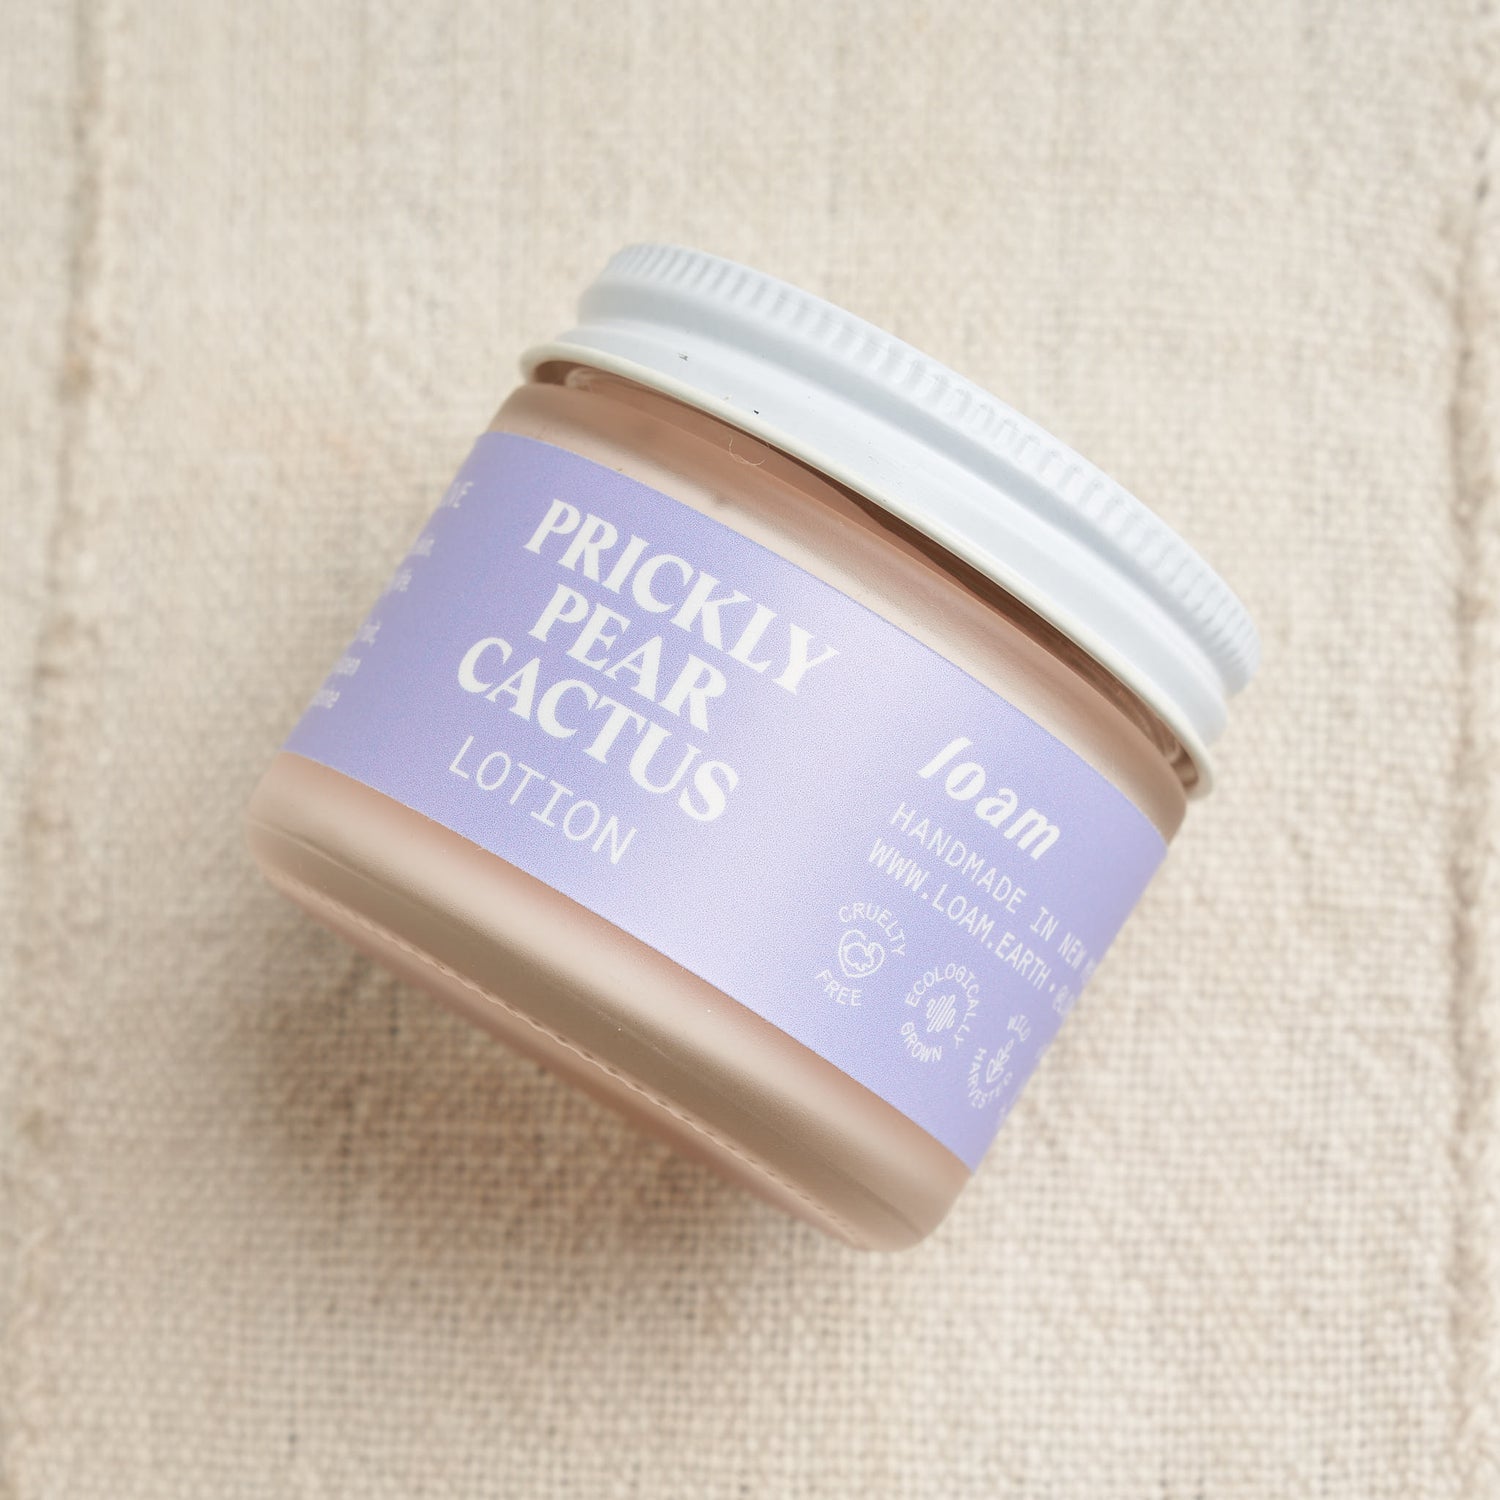 Prickly Pear Cactus Lotion